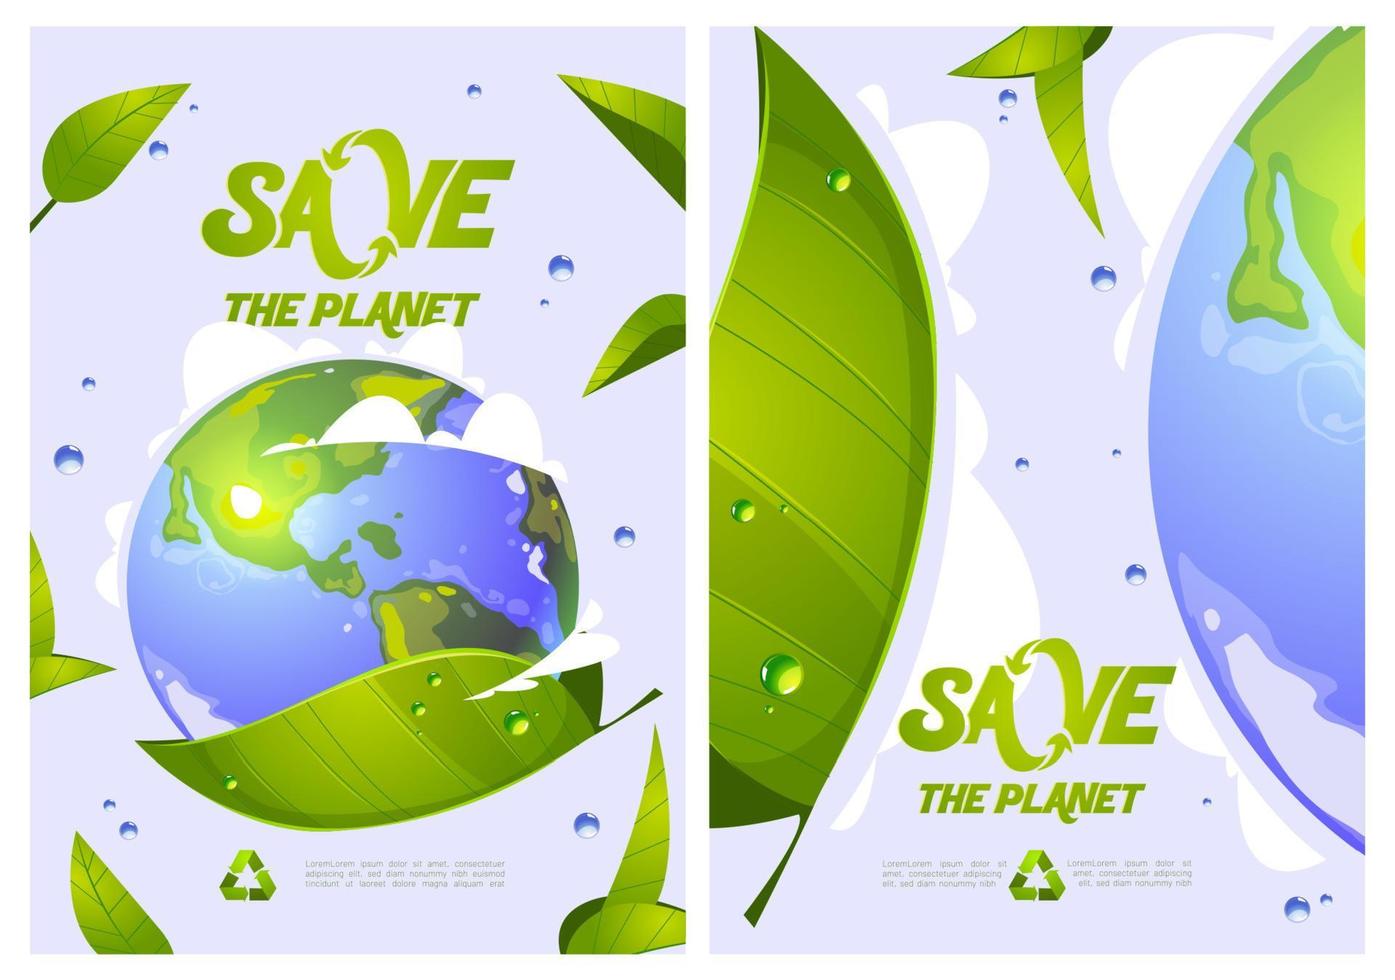 Save the planet cartoon posters with earth globe vector